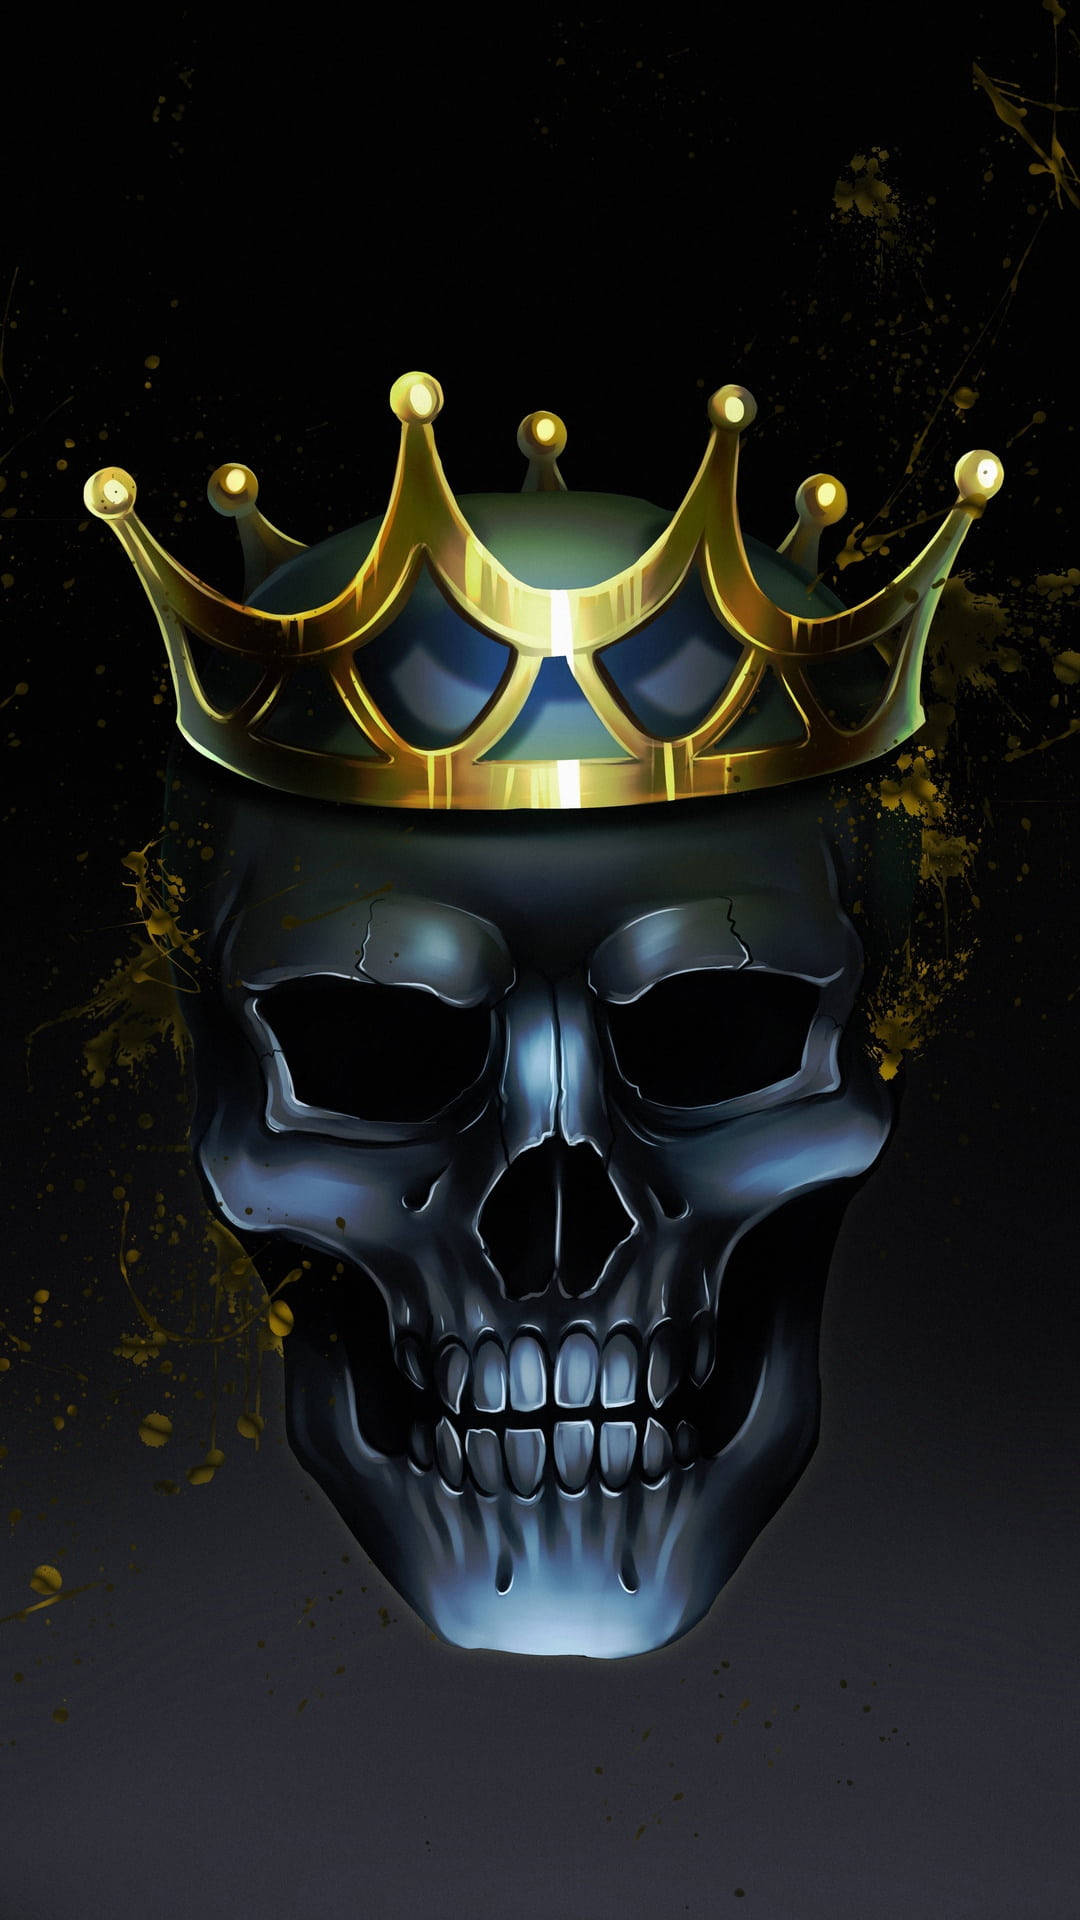 King and Queen Crown King Crown iPhone HD phone wallpaper  Pxfuel